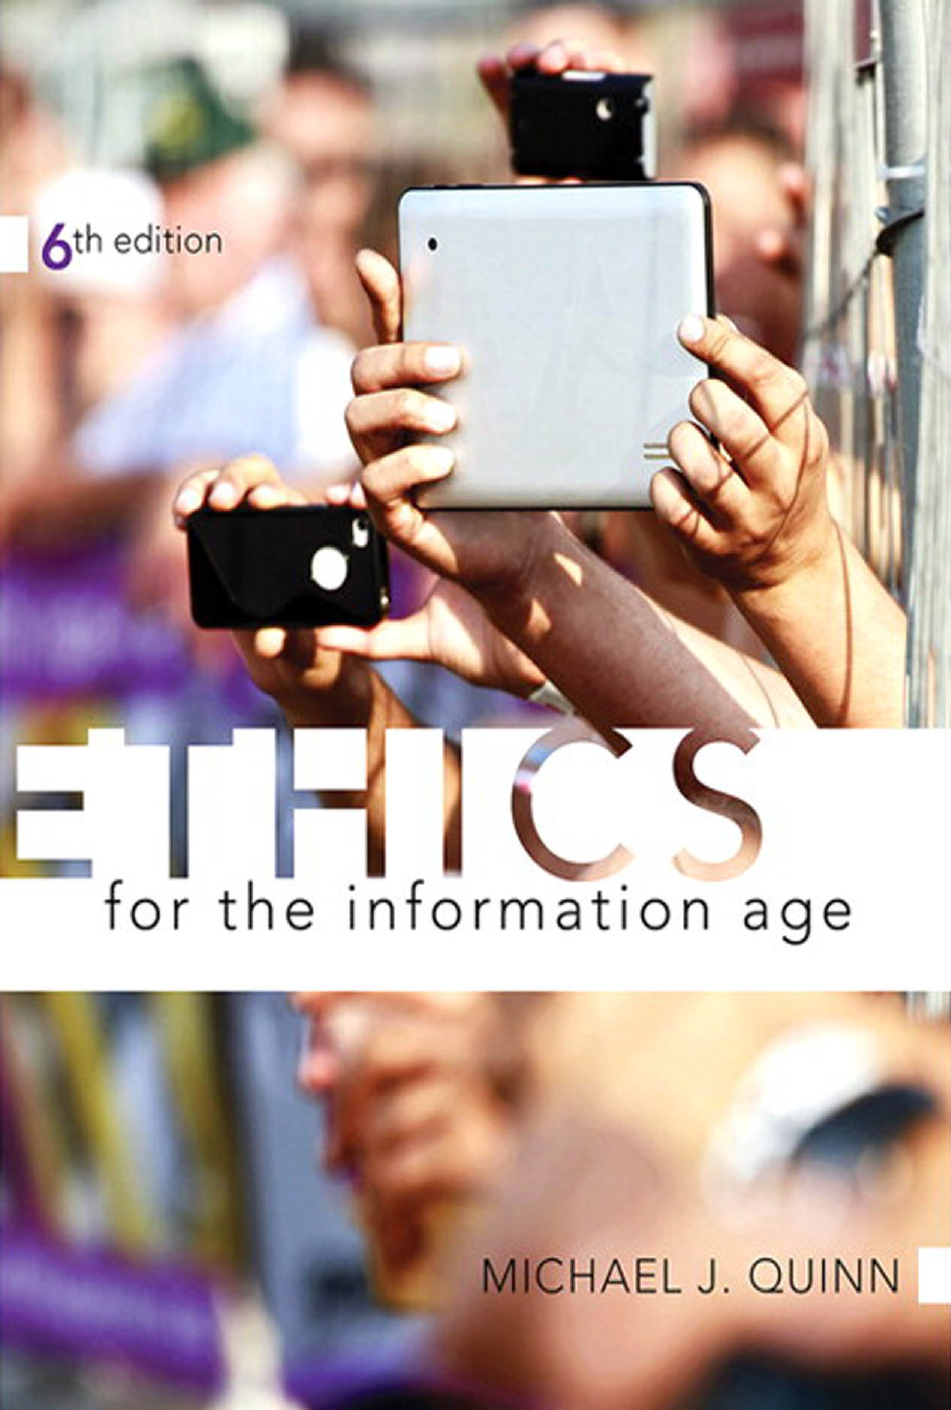 book-ethics for the information age - 